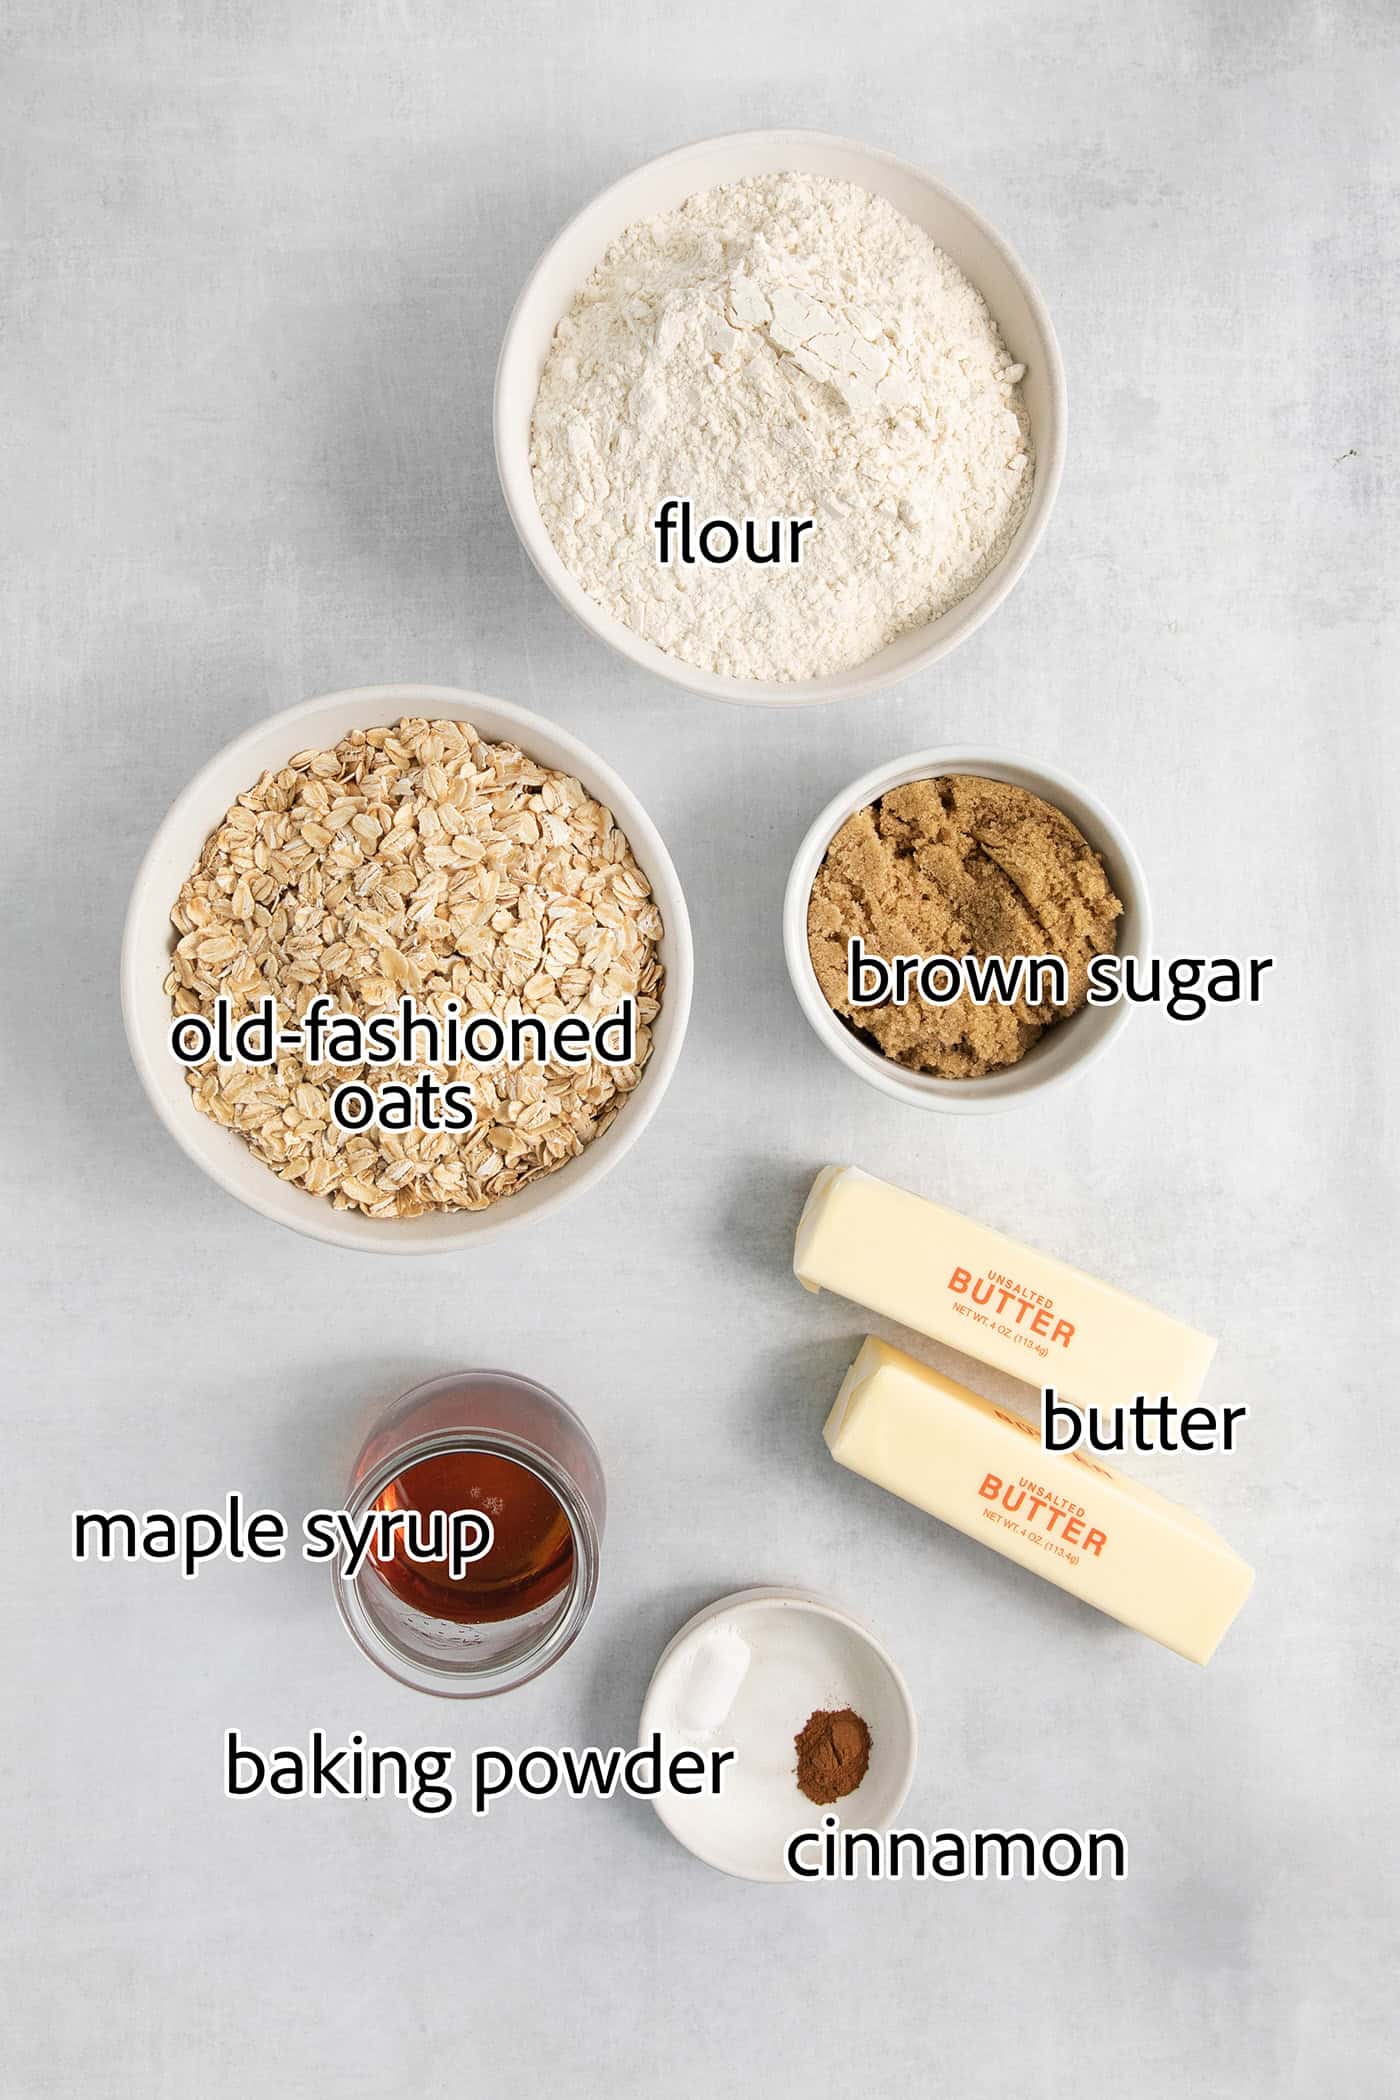 The crumble ingredients are shown labelled: oats, flour, maple syrup, butter, brown sugar, baking powder, cinnamon.